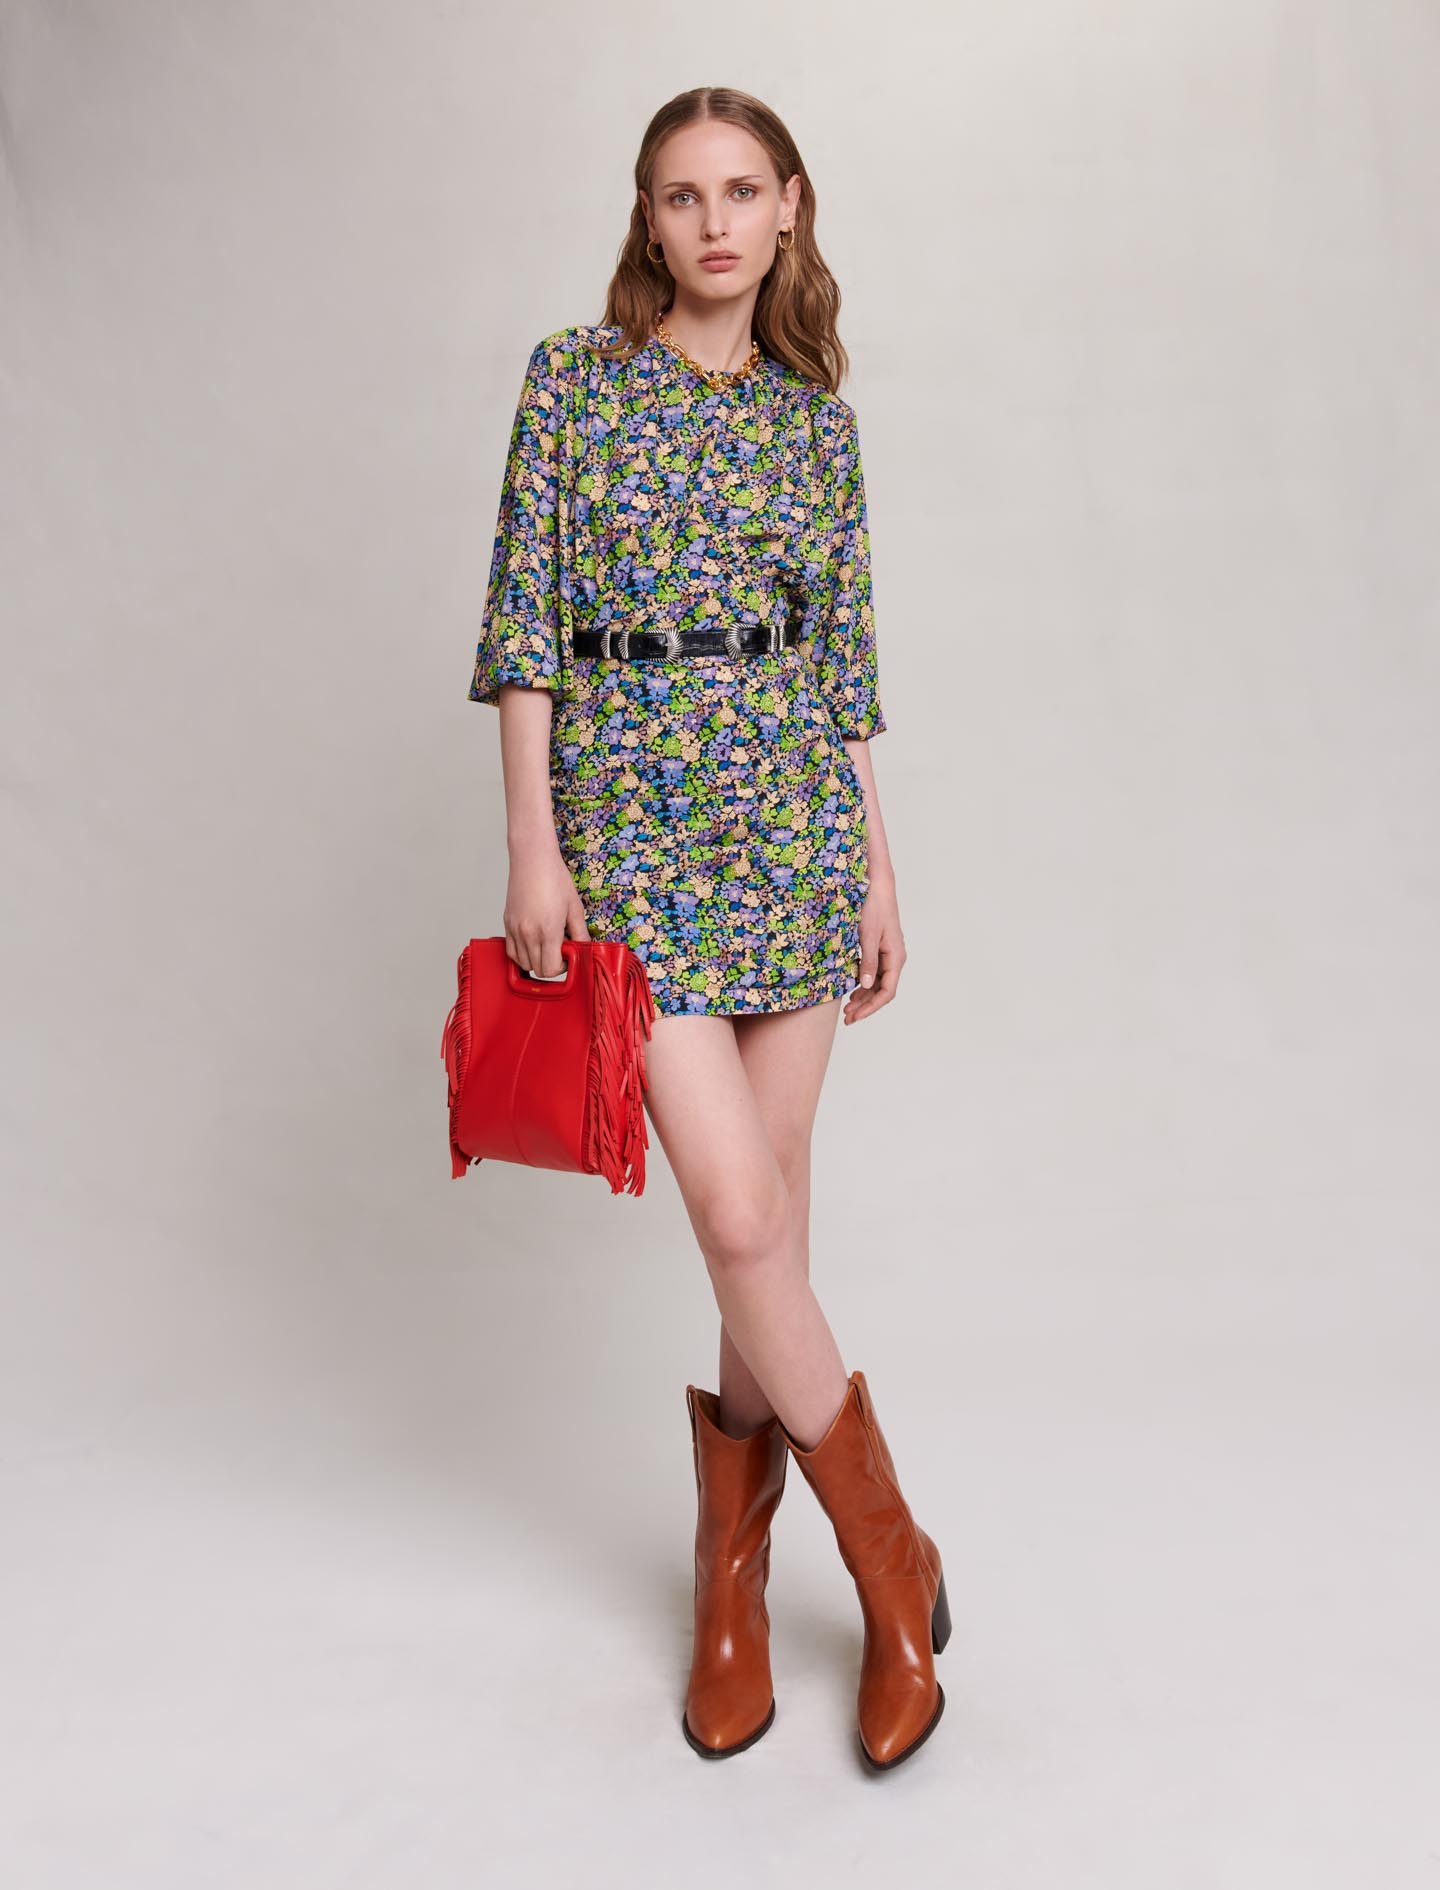 Maje Woman's polyester Lining: Short dress with floral print, in color Primroses Multico Print /